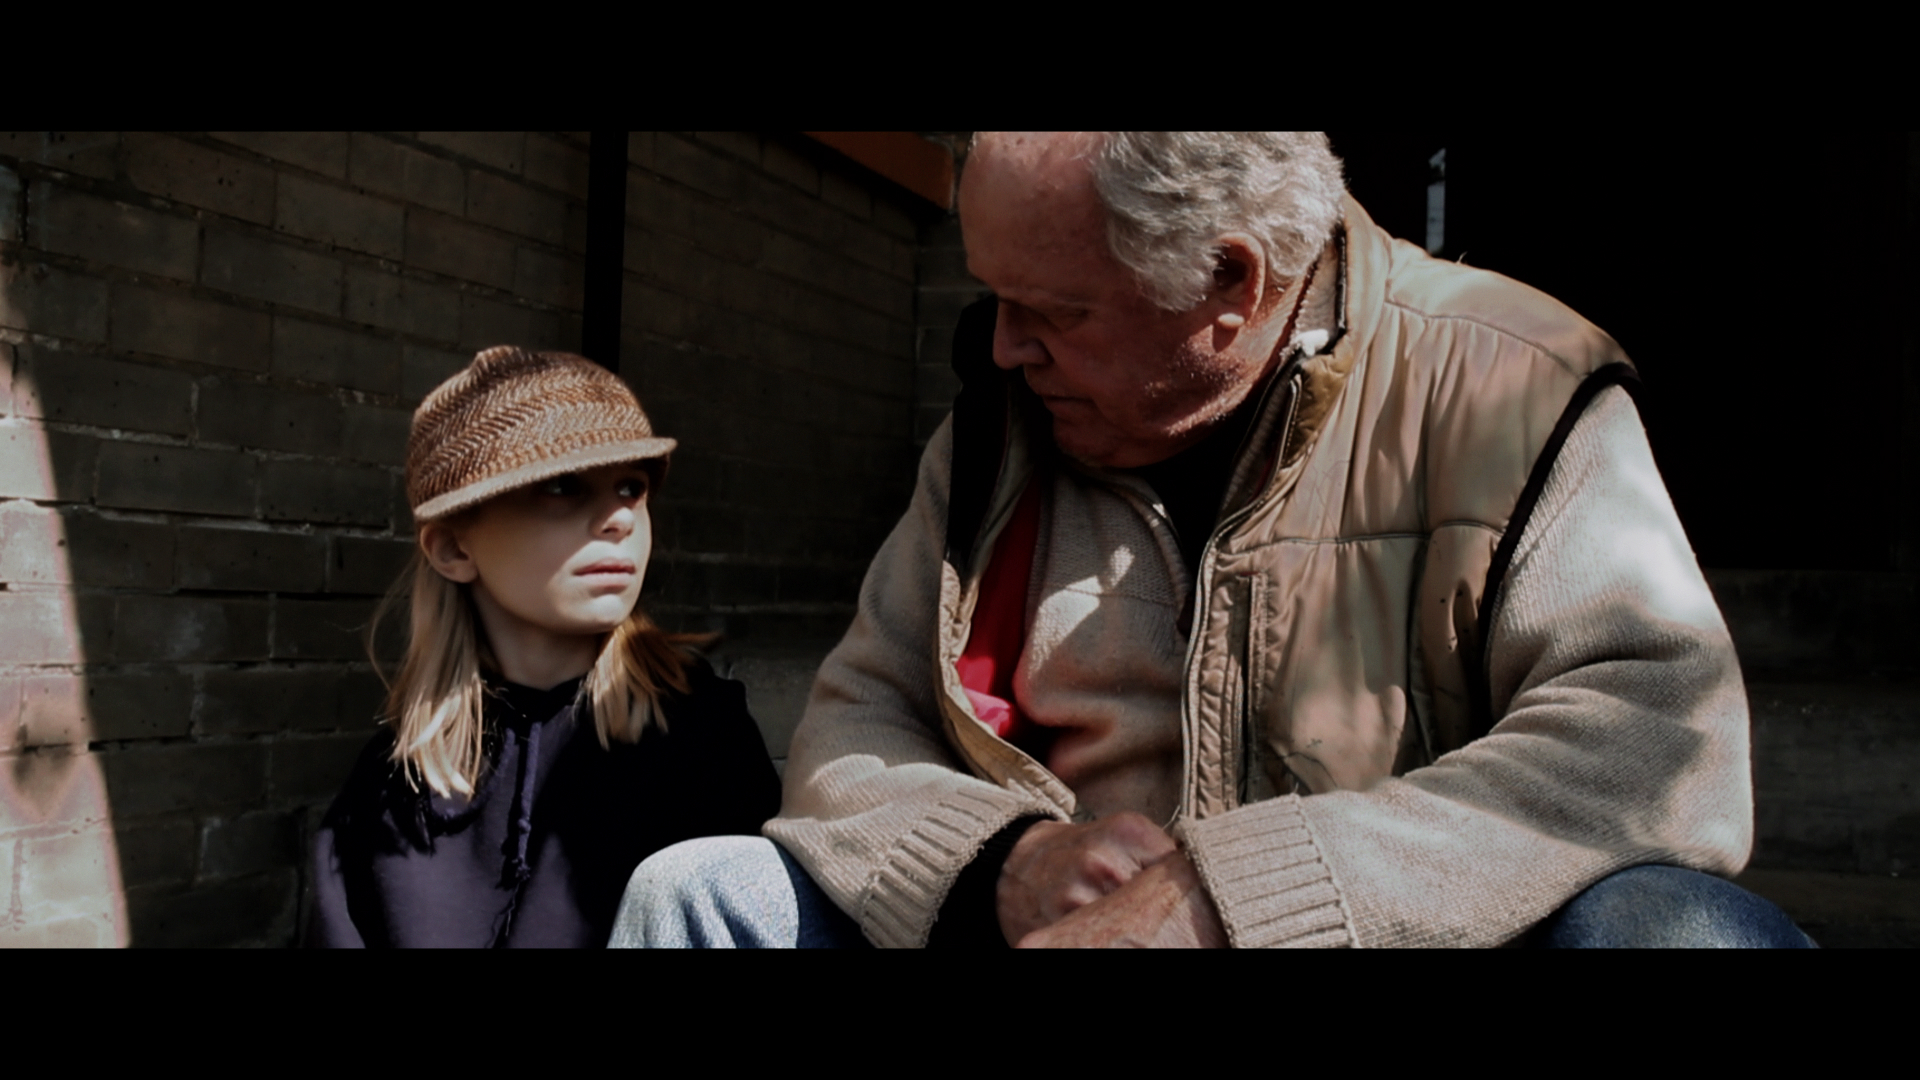 As Grace with veteran actor John Gavigan in ACT OF CONTRITION